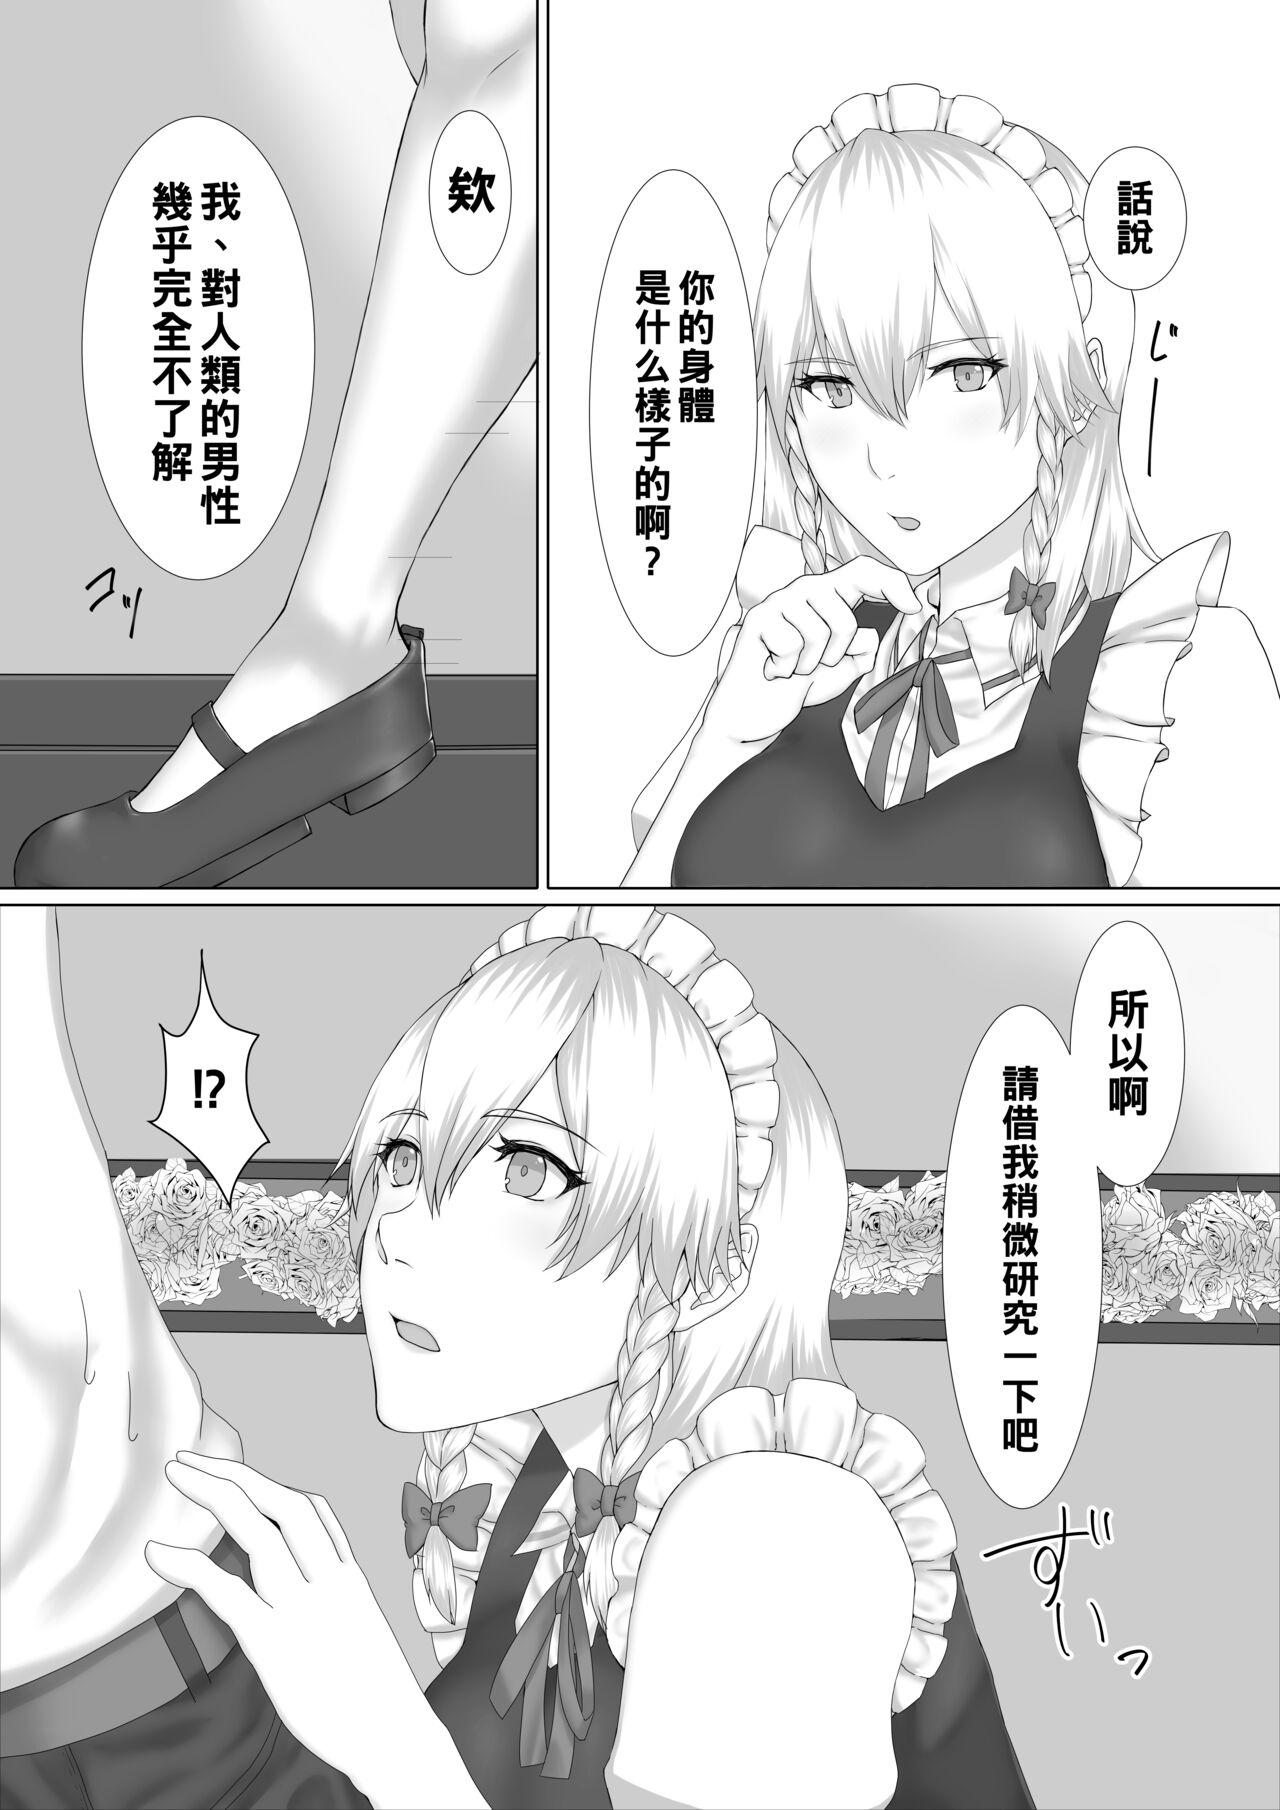 Spycam [糖質過多ぱると (只野めざし)] 咲夜さんとセフレになる本 (東方Project)（Chinese） - Touhou project Gay 3some - Page 3